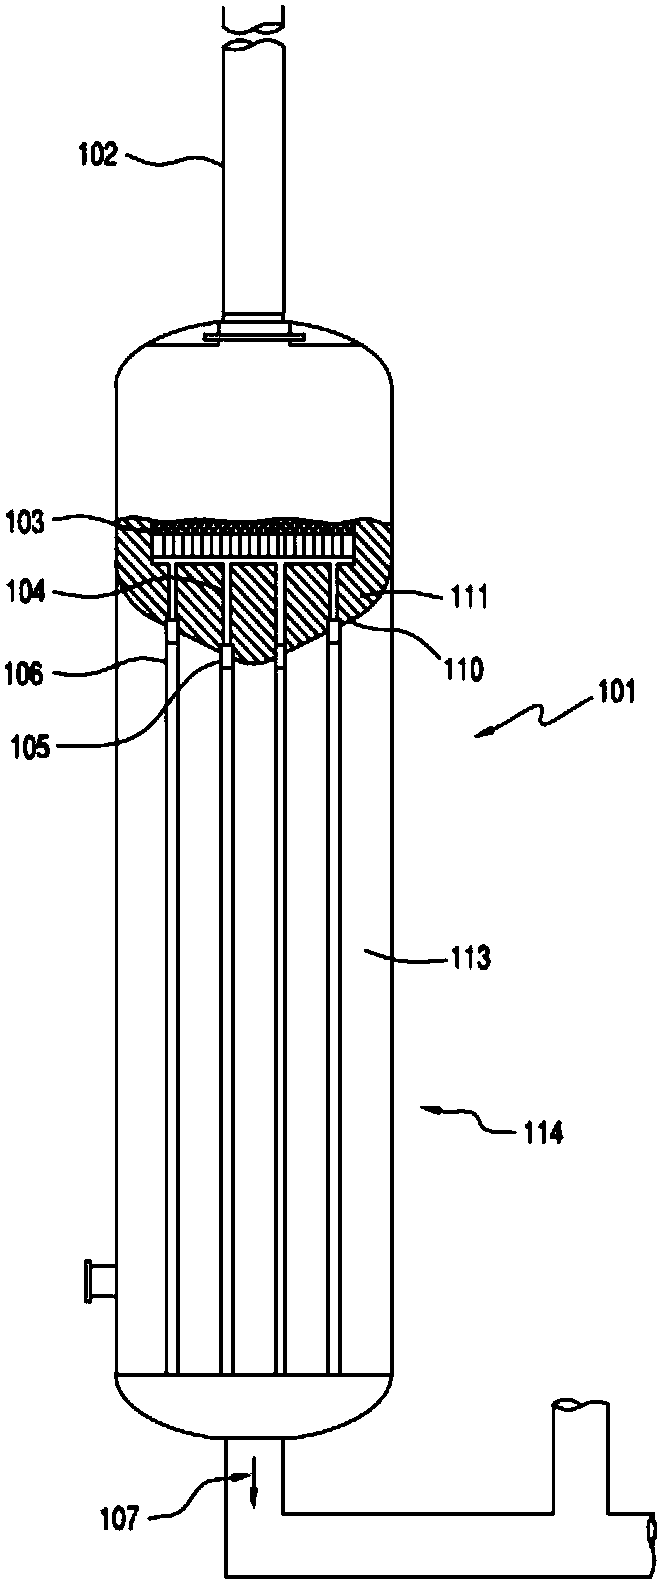 Method for stabilizing heat exchange tubes in the andrussow process